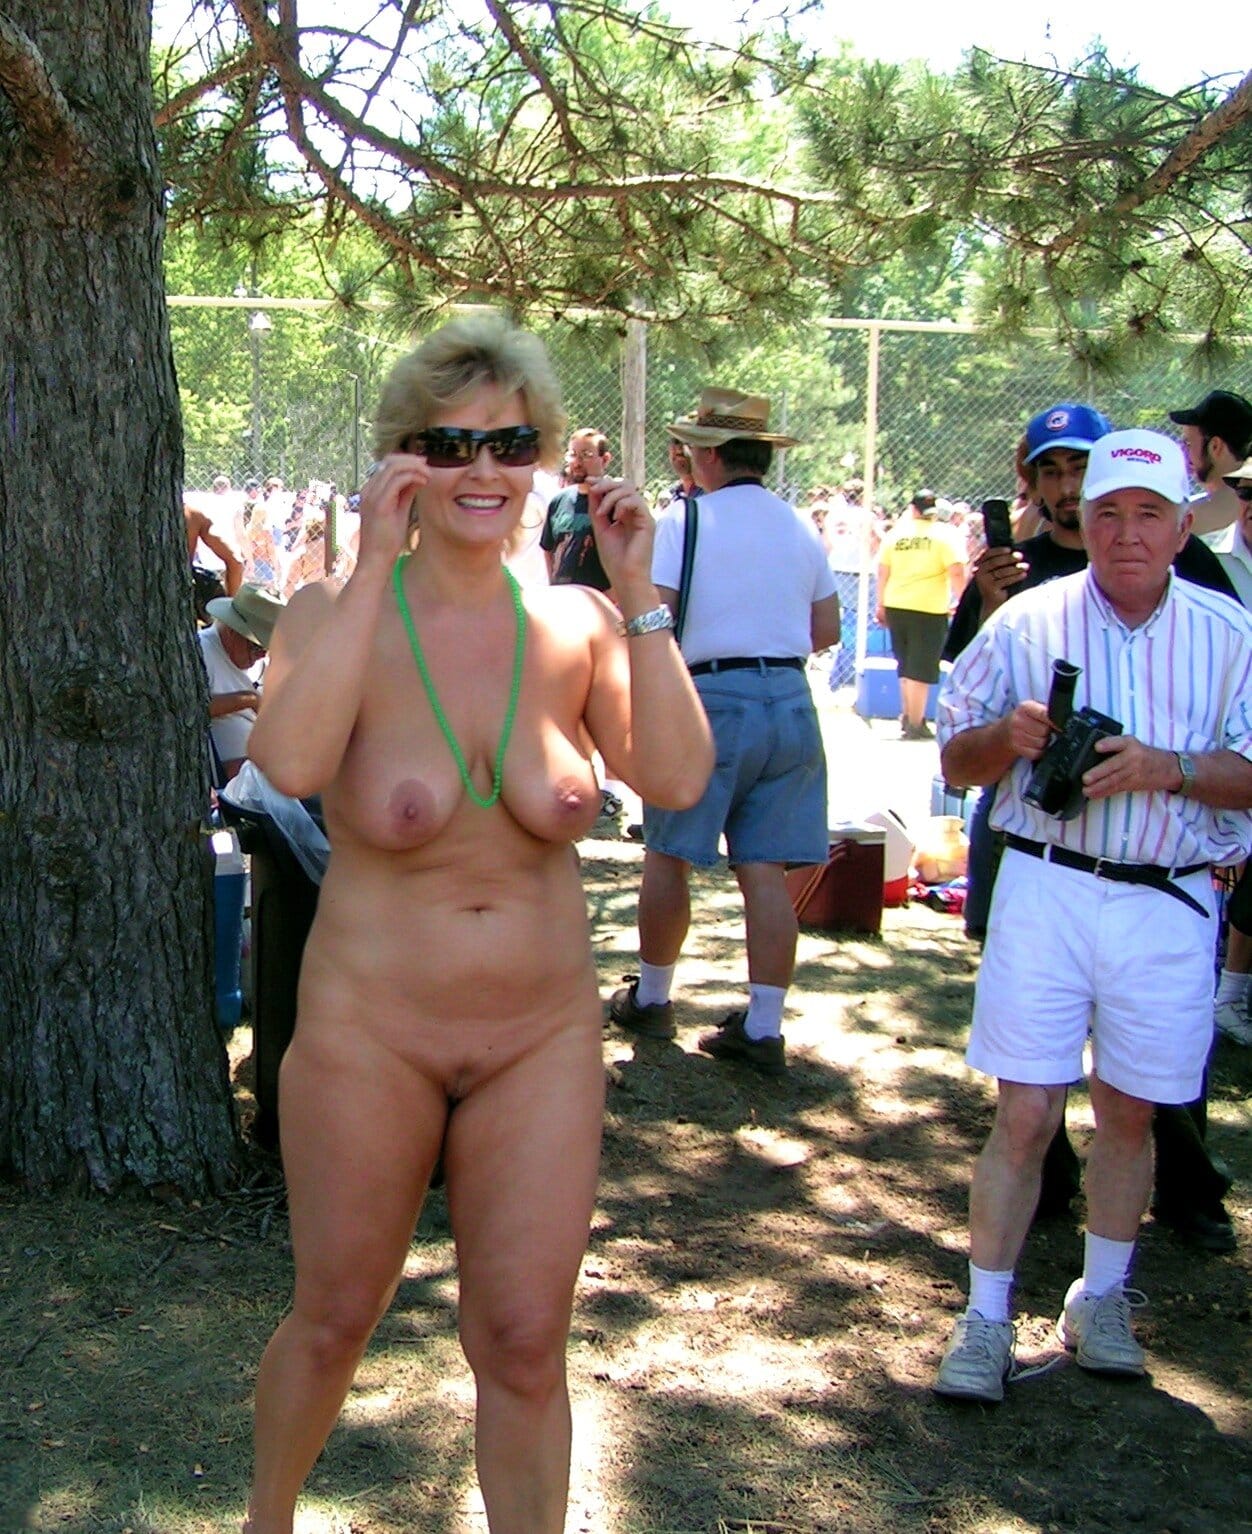 Real Amateurs Public Nudity Pics Mature Flashing Pics  : Sexy mature woman naked in a crowd